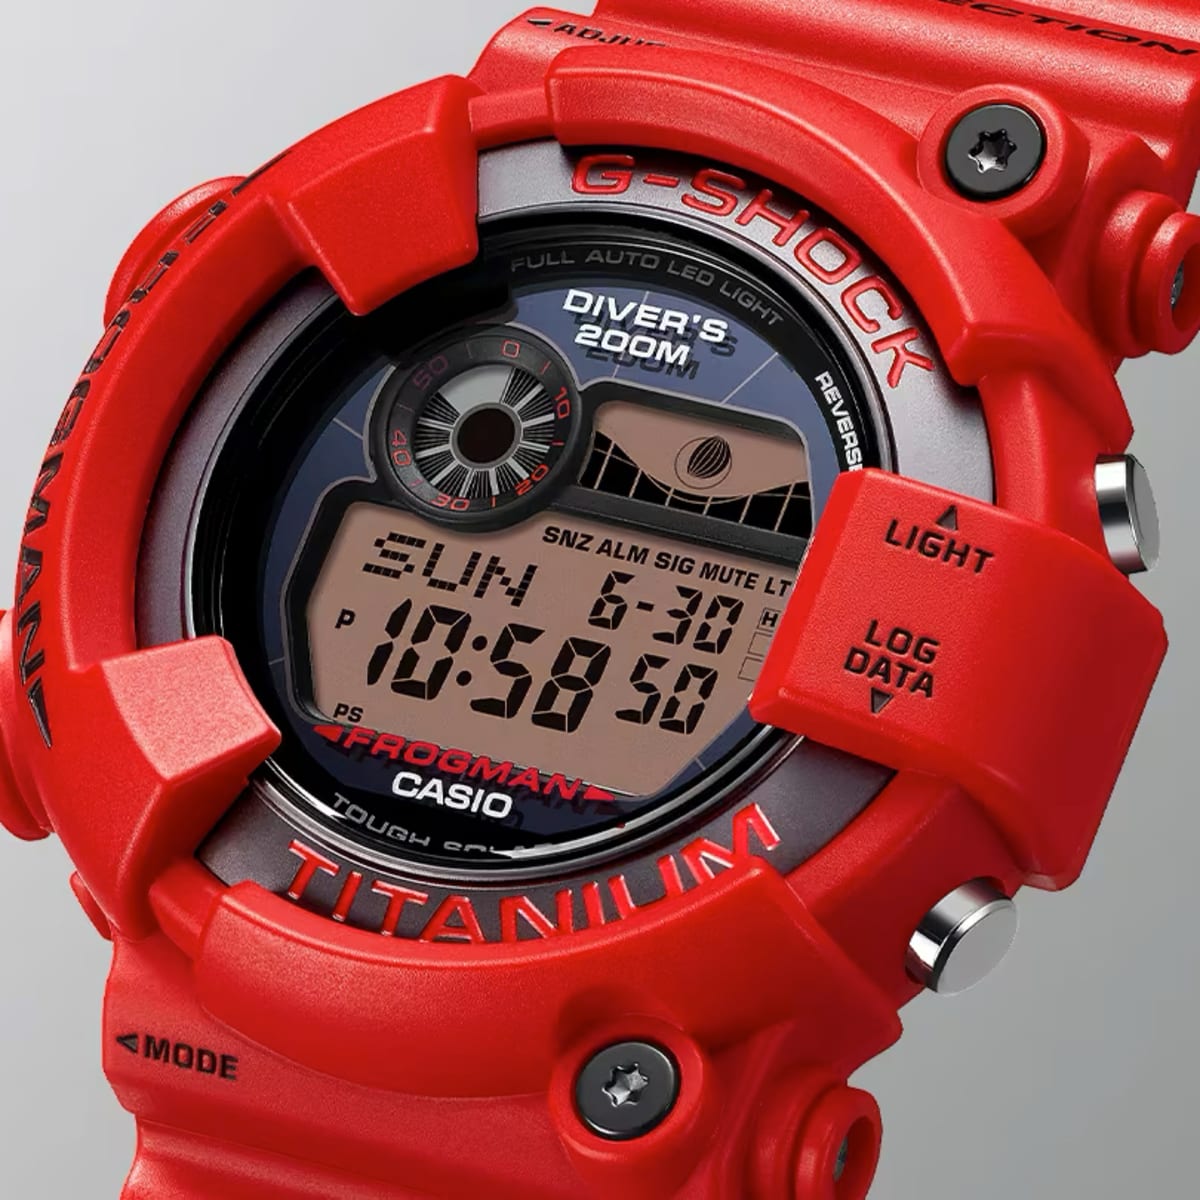 Casio brings back a limited edition Frogman from 2000 - Acquire